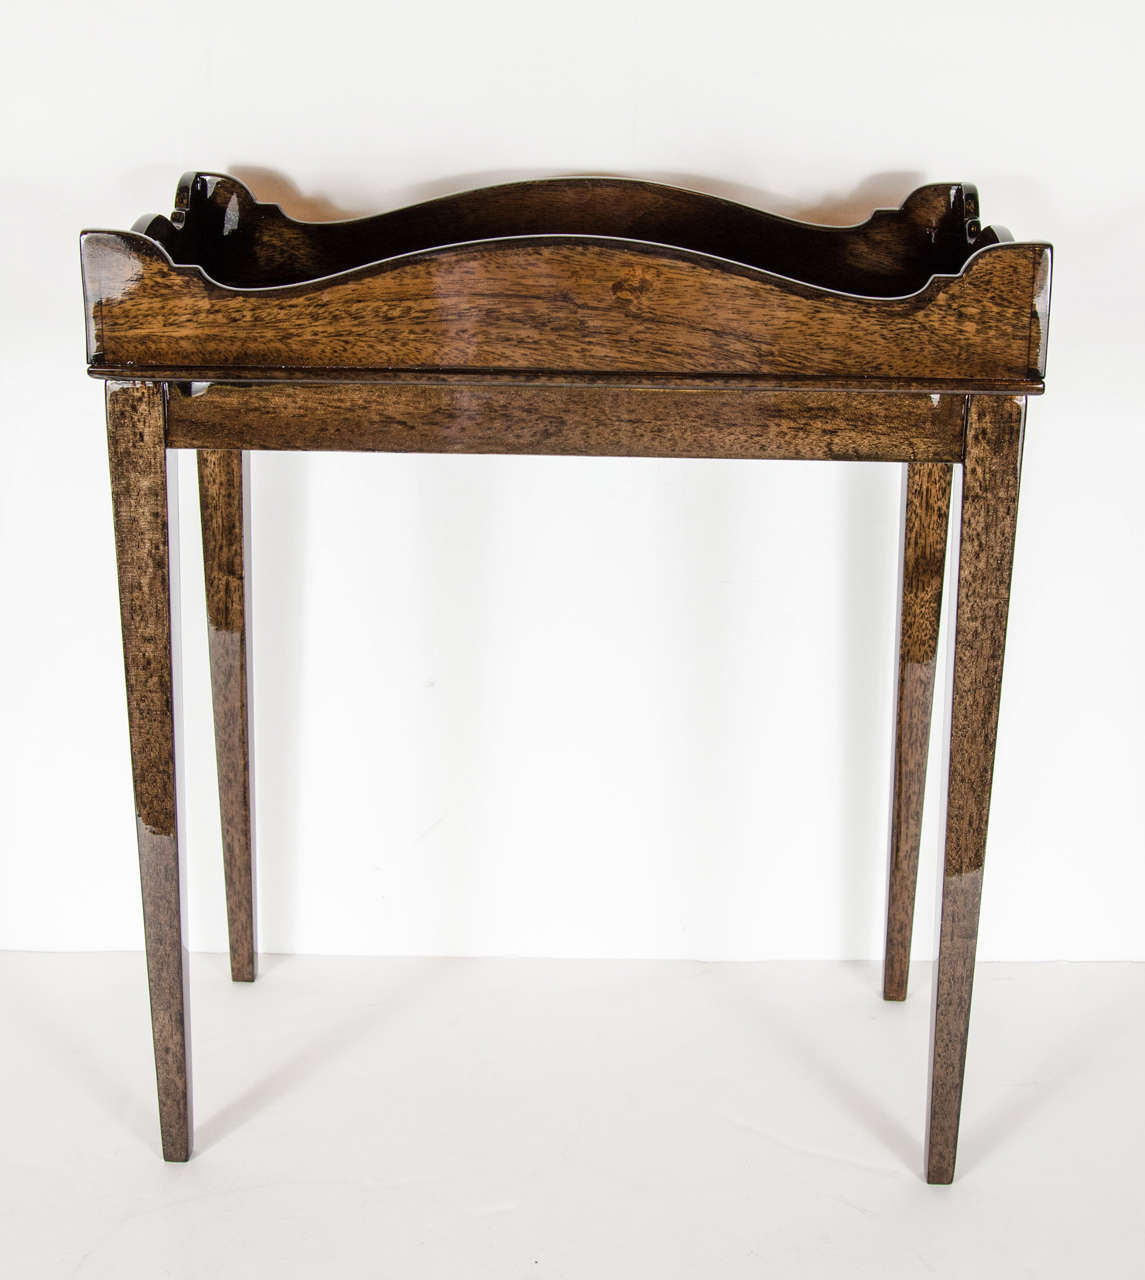 This elegant table features a tapered leg design with a top design of a tray design. It is made of exotic book-matched exotic mahogany. This table has been mint restored.